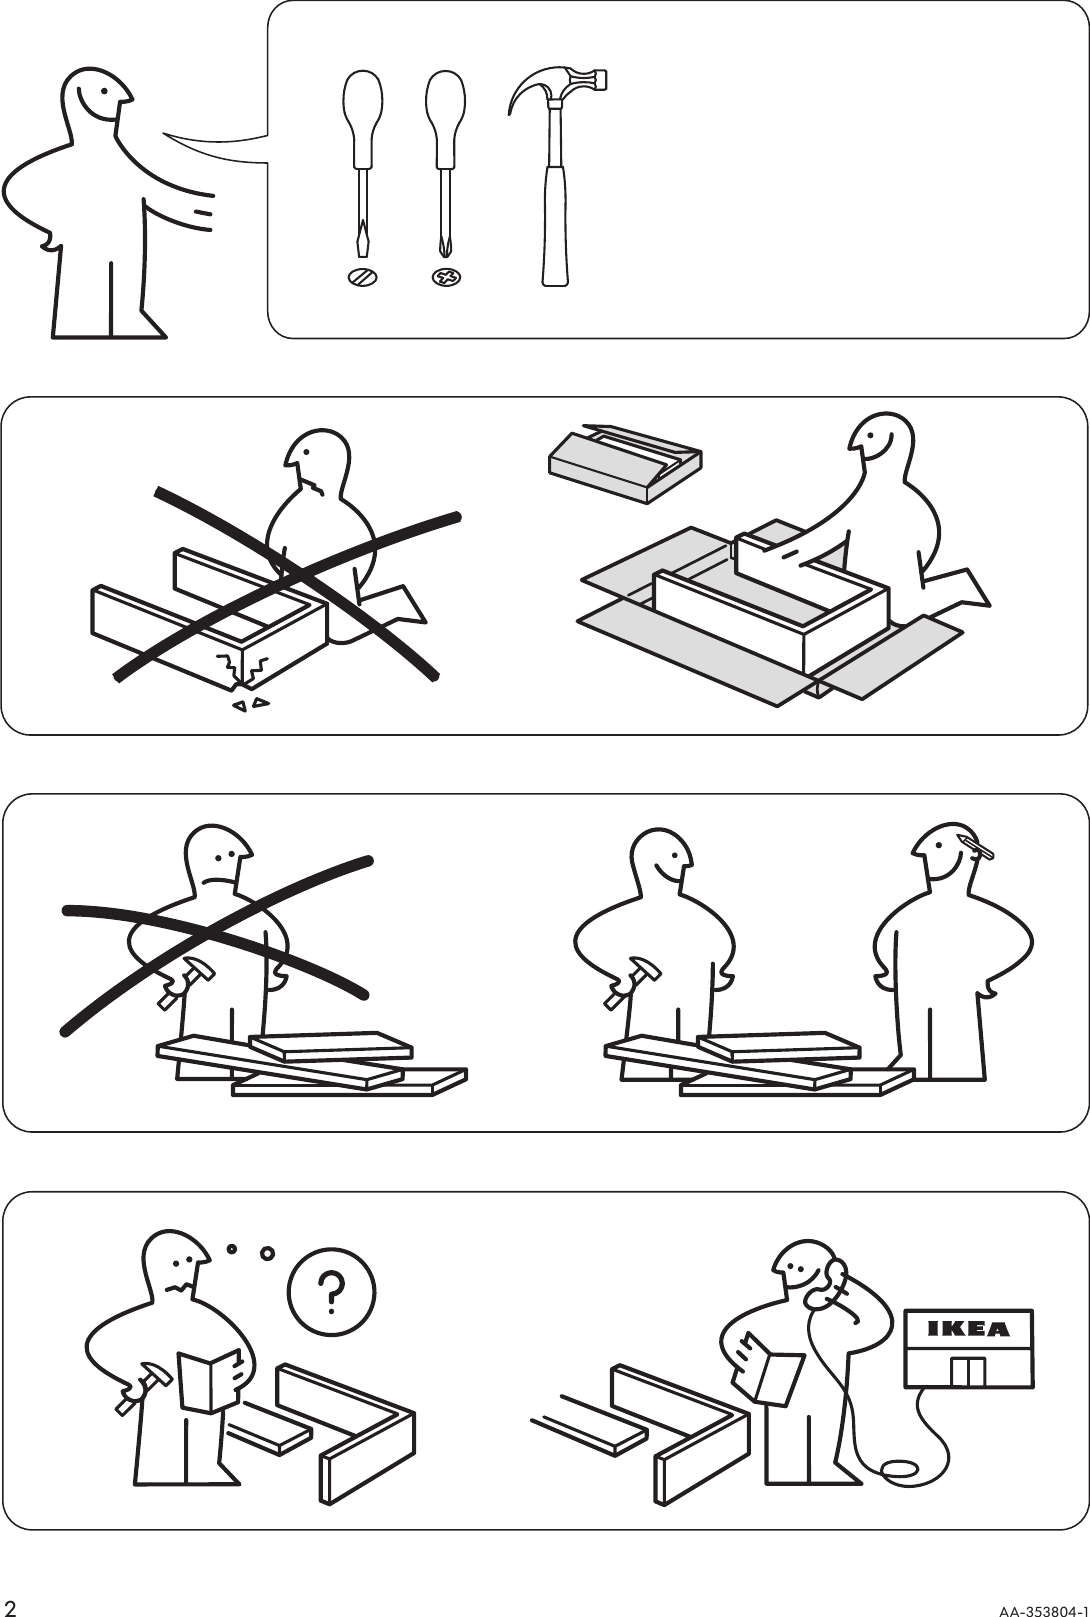 Page 2 of 12 - Ikea Ikea-Bjursta-Extendable-Dining-Table-94-114-133X43-Assembly-Instruction